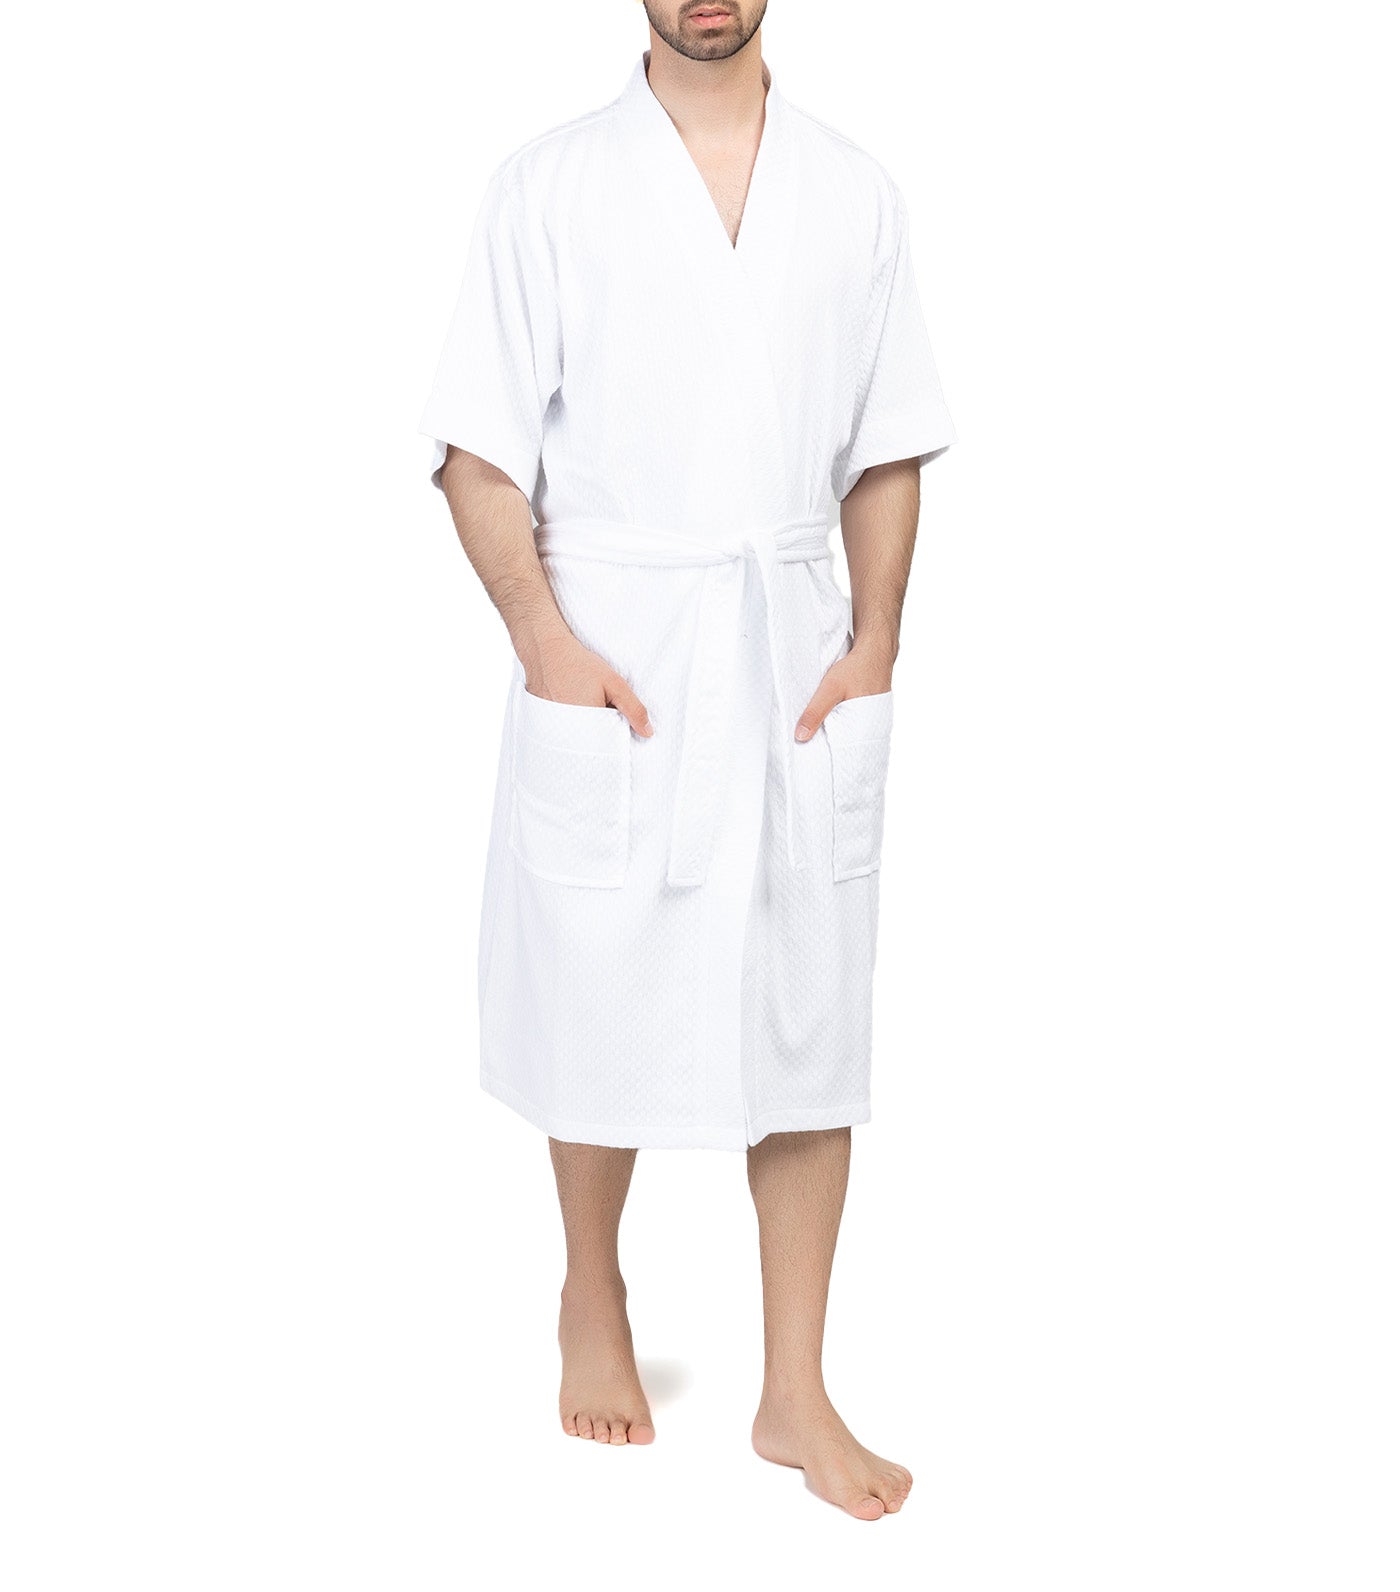 Honeycomb Robe for Male - White